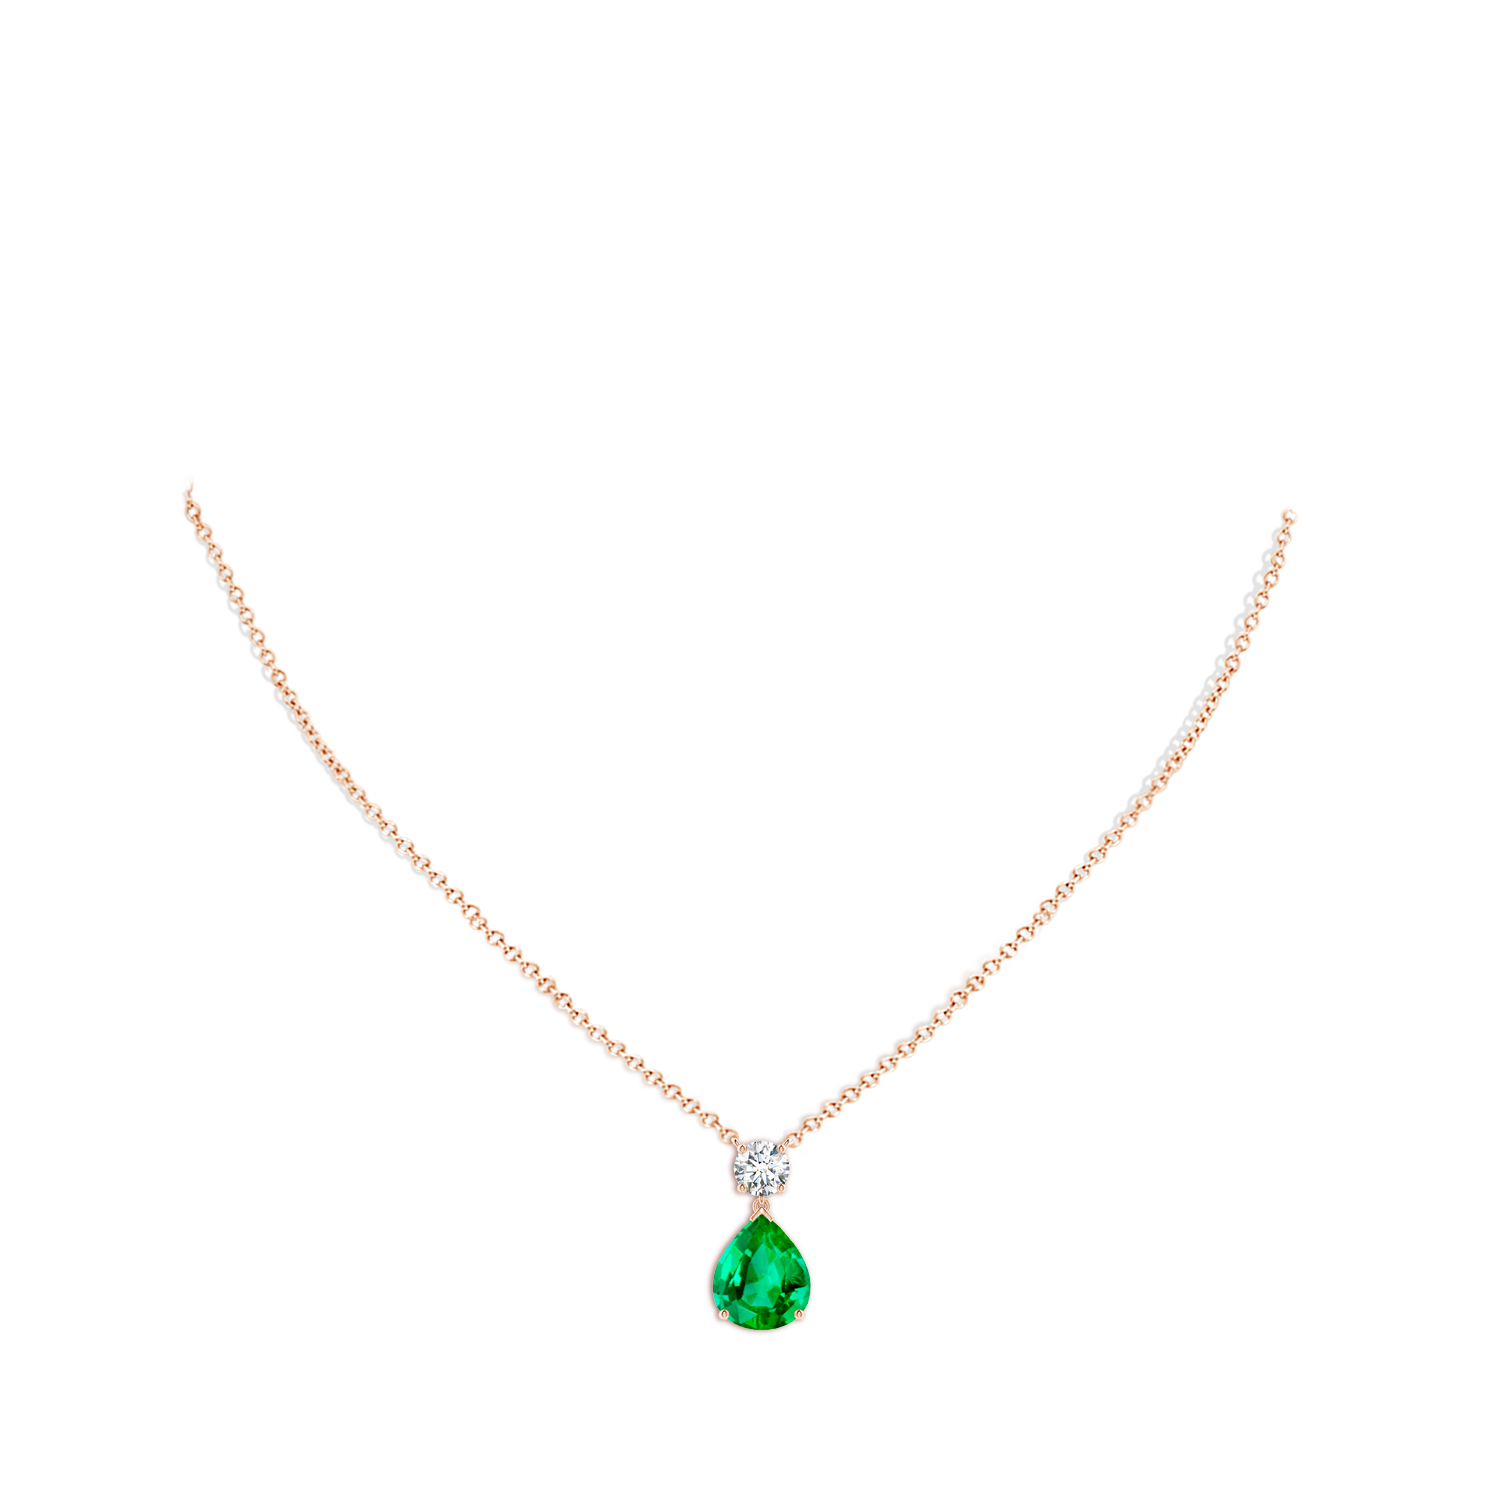 AAA - Emerald / 5.21 CT / 18 KT Rose Gold